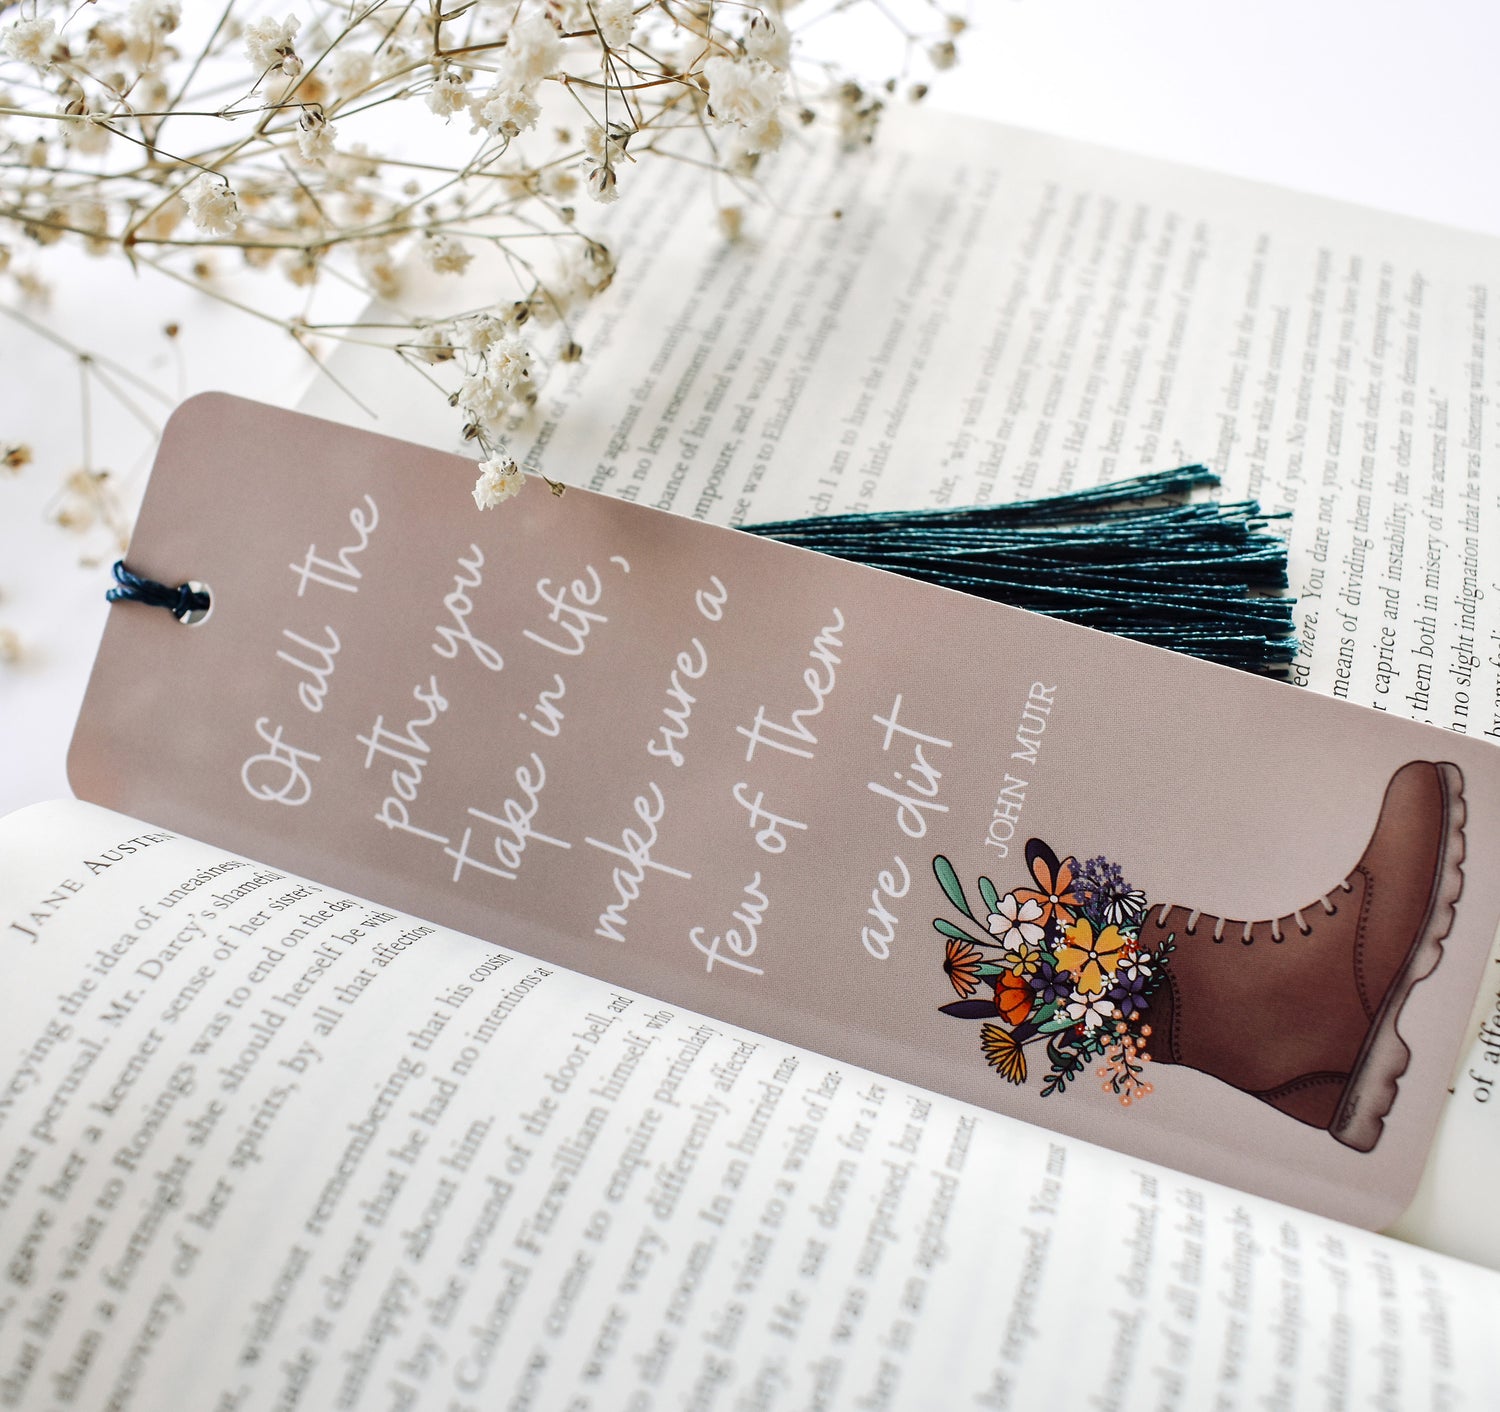 Bookmark with the John Muir quote &quot;Of all the paths you take in life, make sure a few of them are dirt&quot; and a hiking boot with flowers design